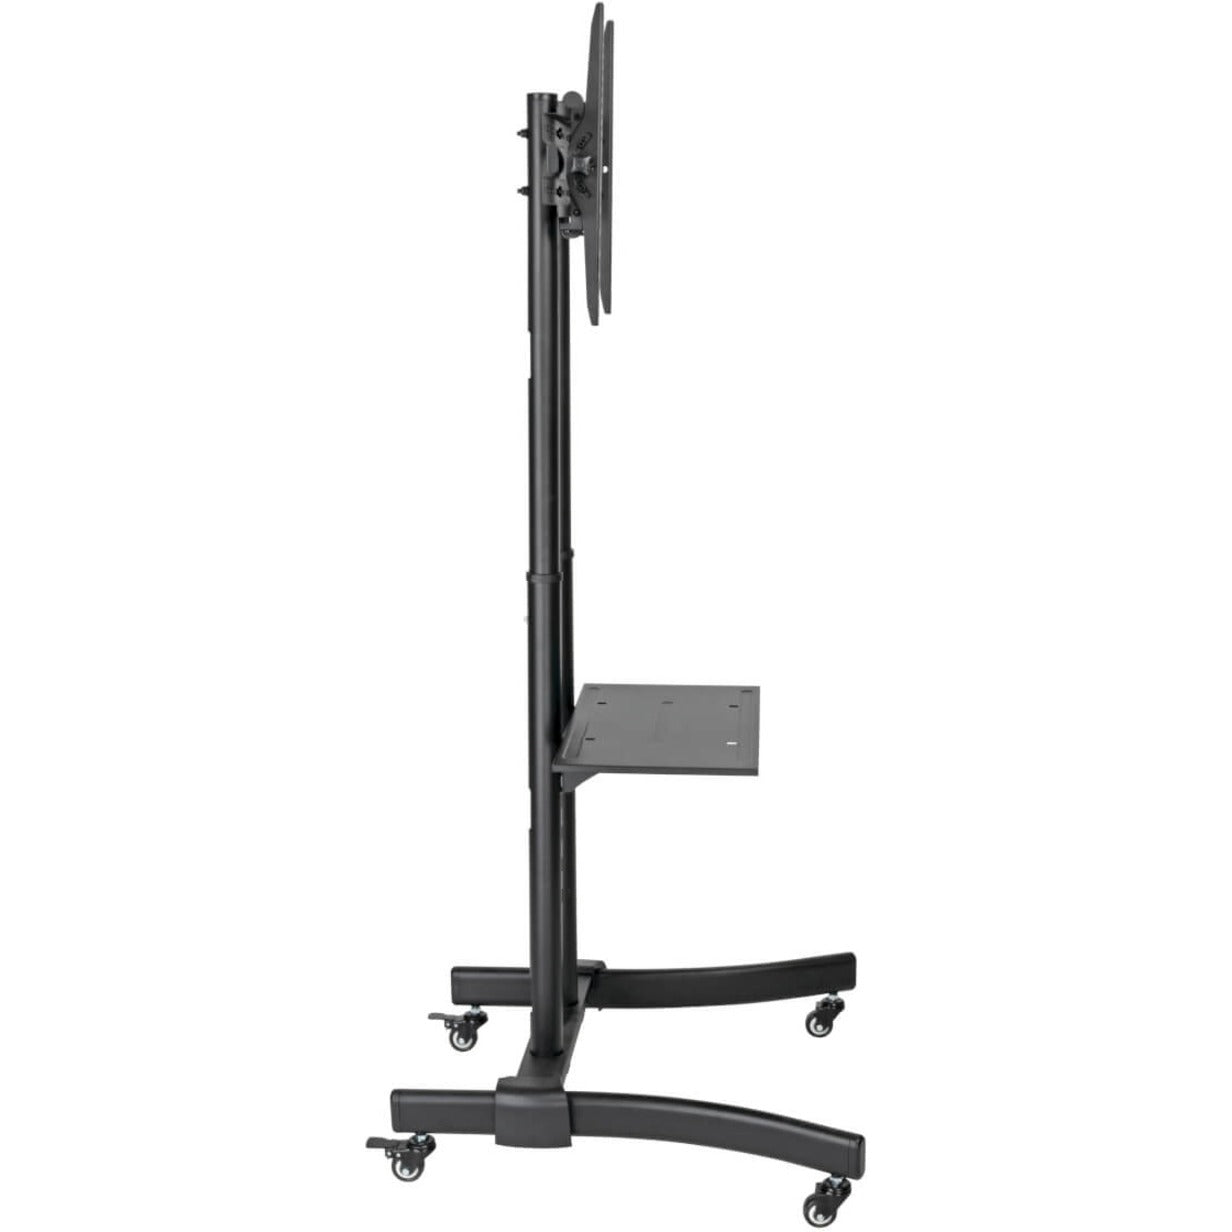 Tripp Lite DMCS3770L Mobile Flat-Panel Floor Stand - Classic Edition, 37" to 70" TVs and Monitors, Height Adjustable